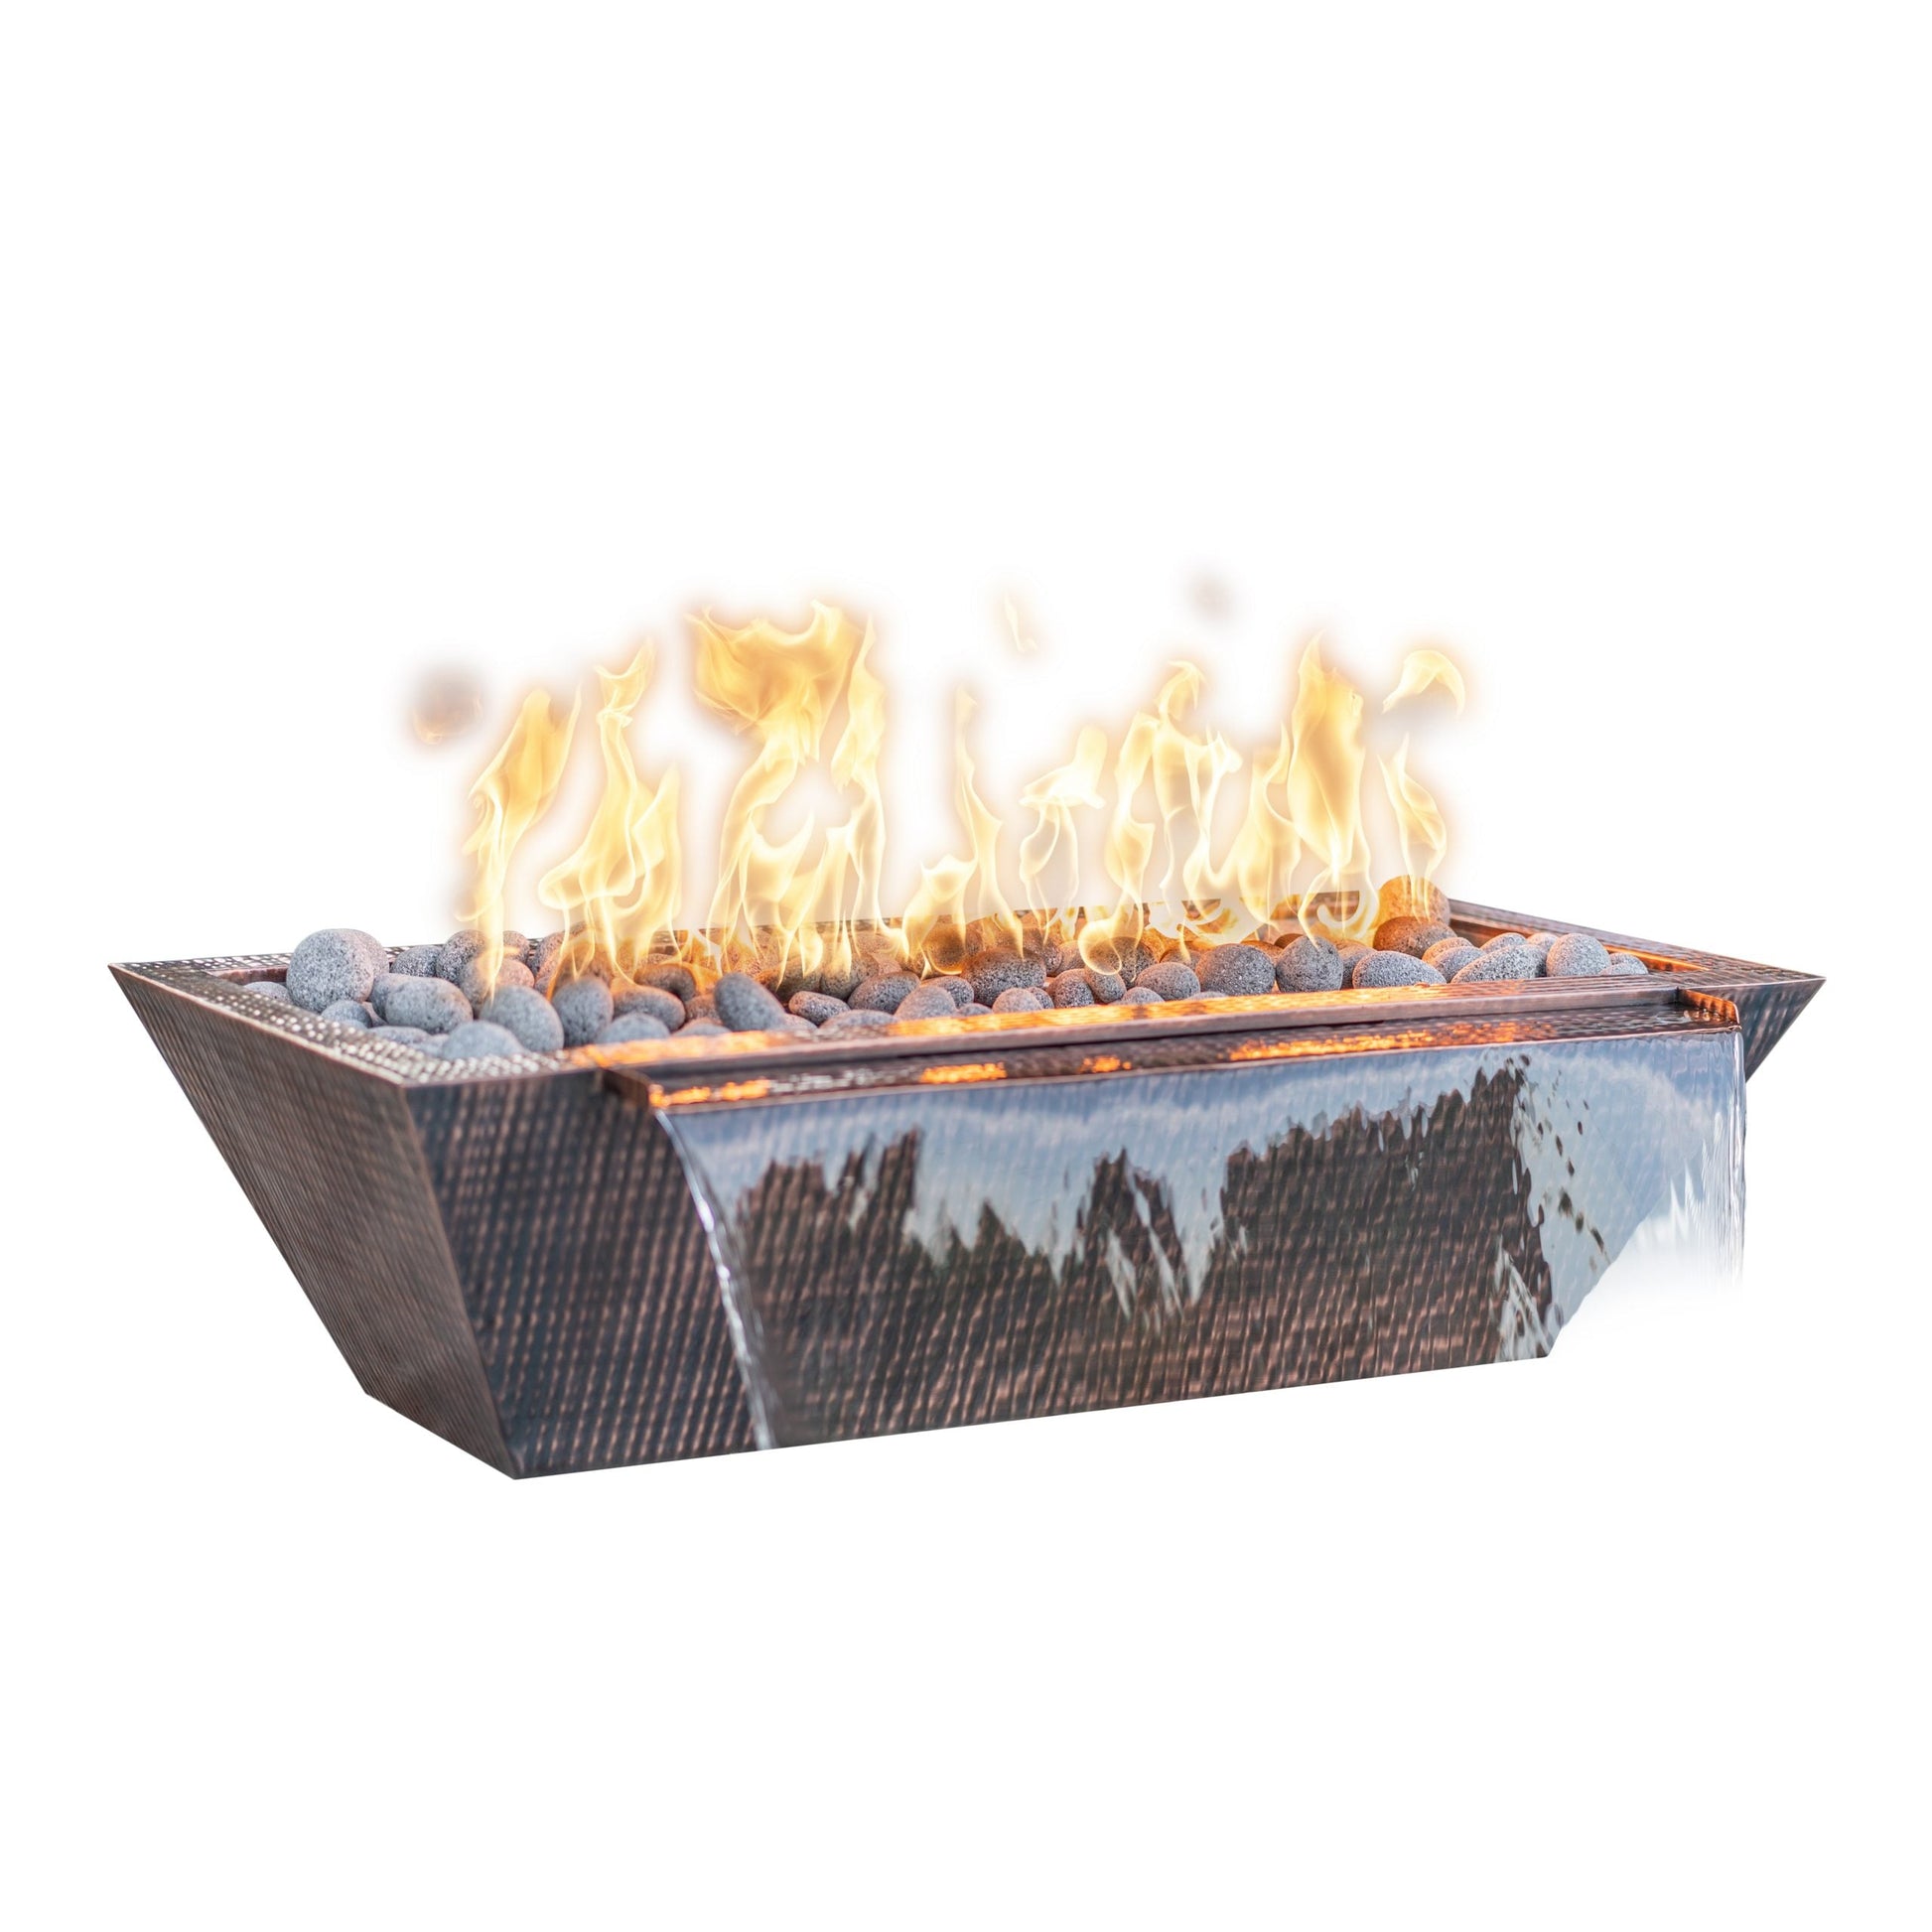 The Outdoor Plus Linear Maya 72" Hammered Copper Natural Gas Fire & Water Bowl with Match Lit with Flame Sense Ignition